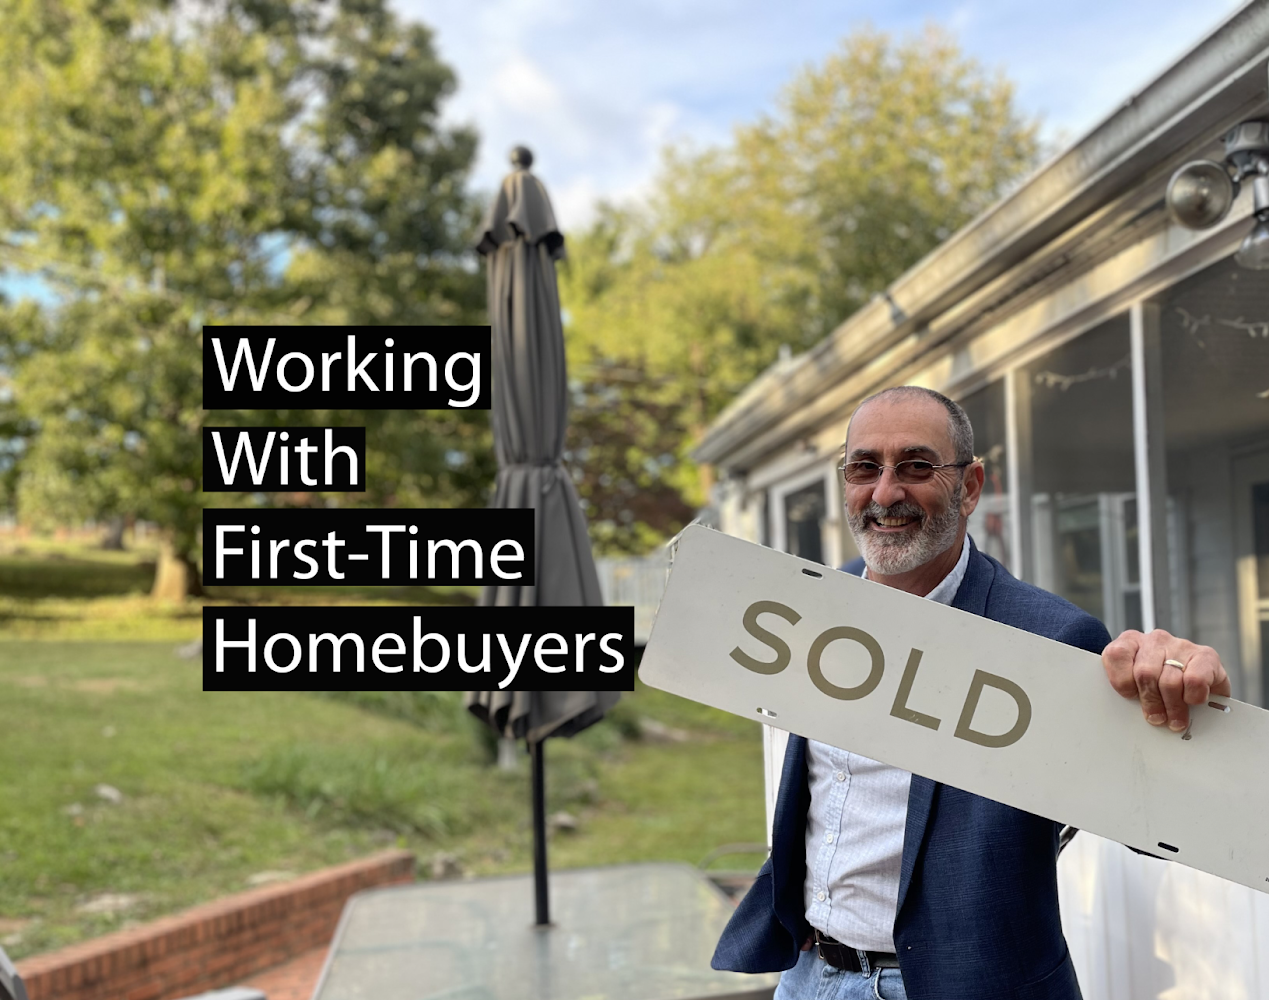 Working with First-time Homebuyers